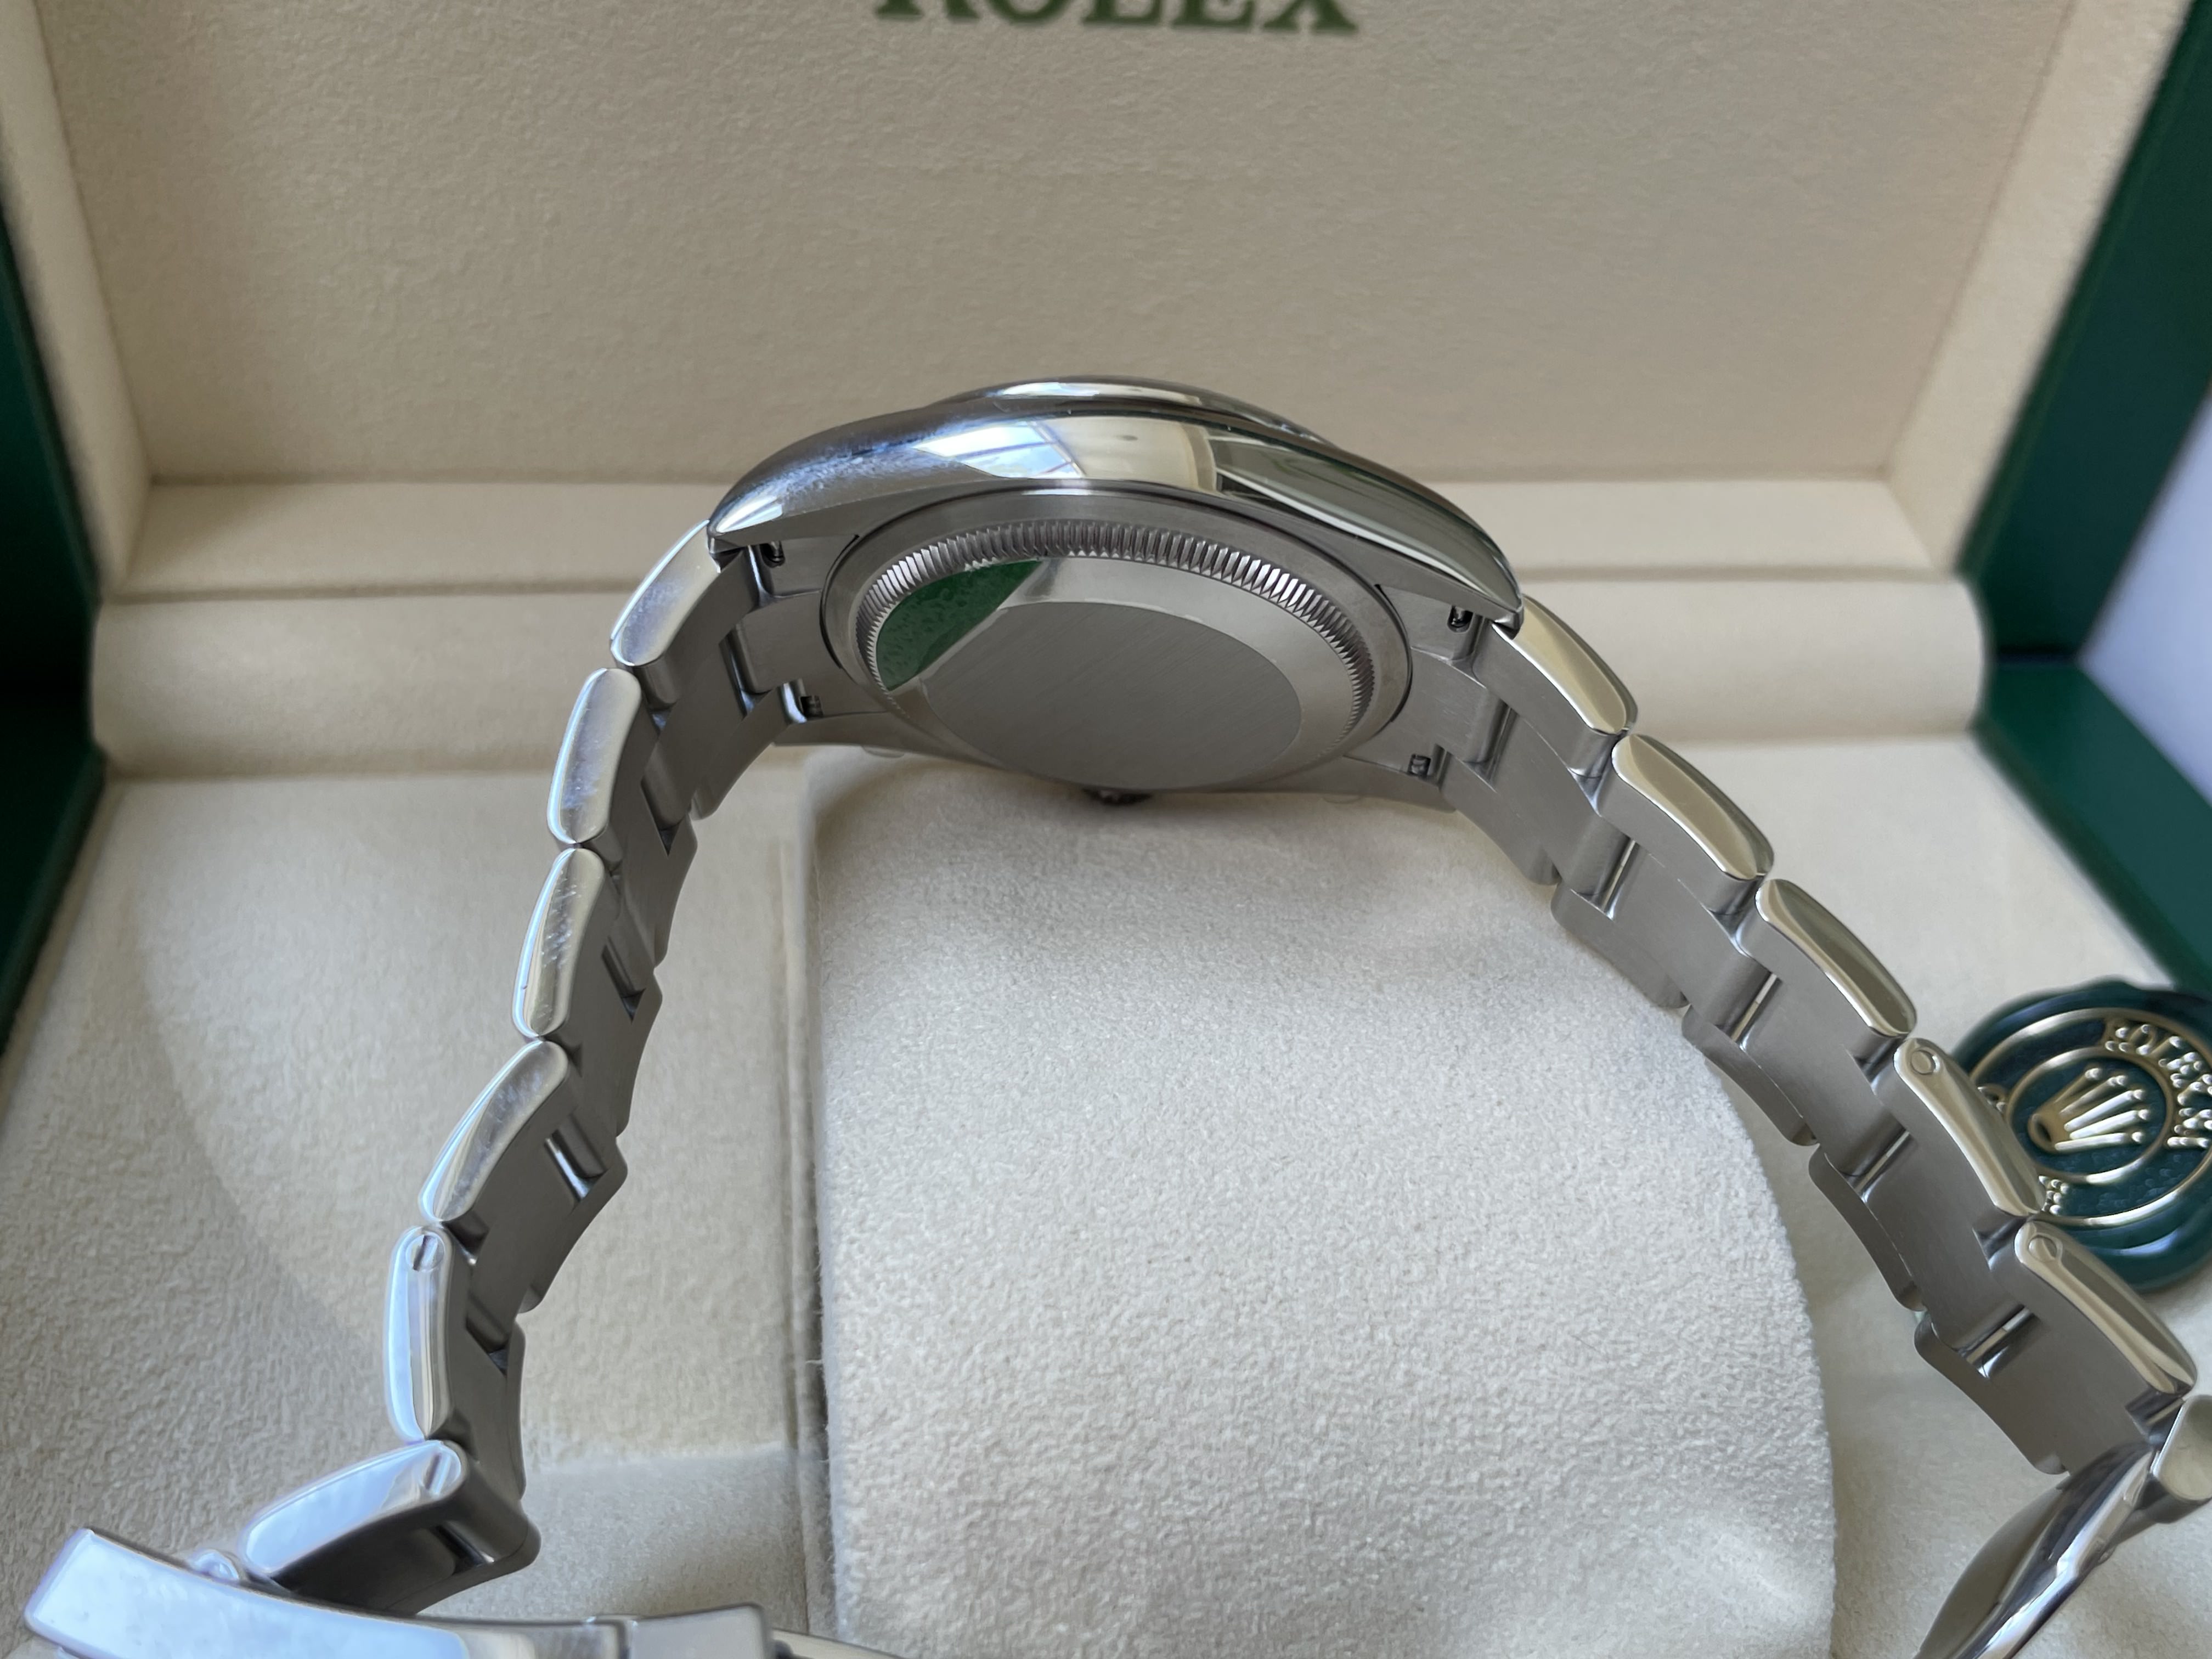 New Rolex Oyster Perpetual 126000 green dial watch 2021 36mm - 219284